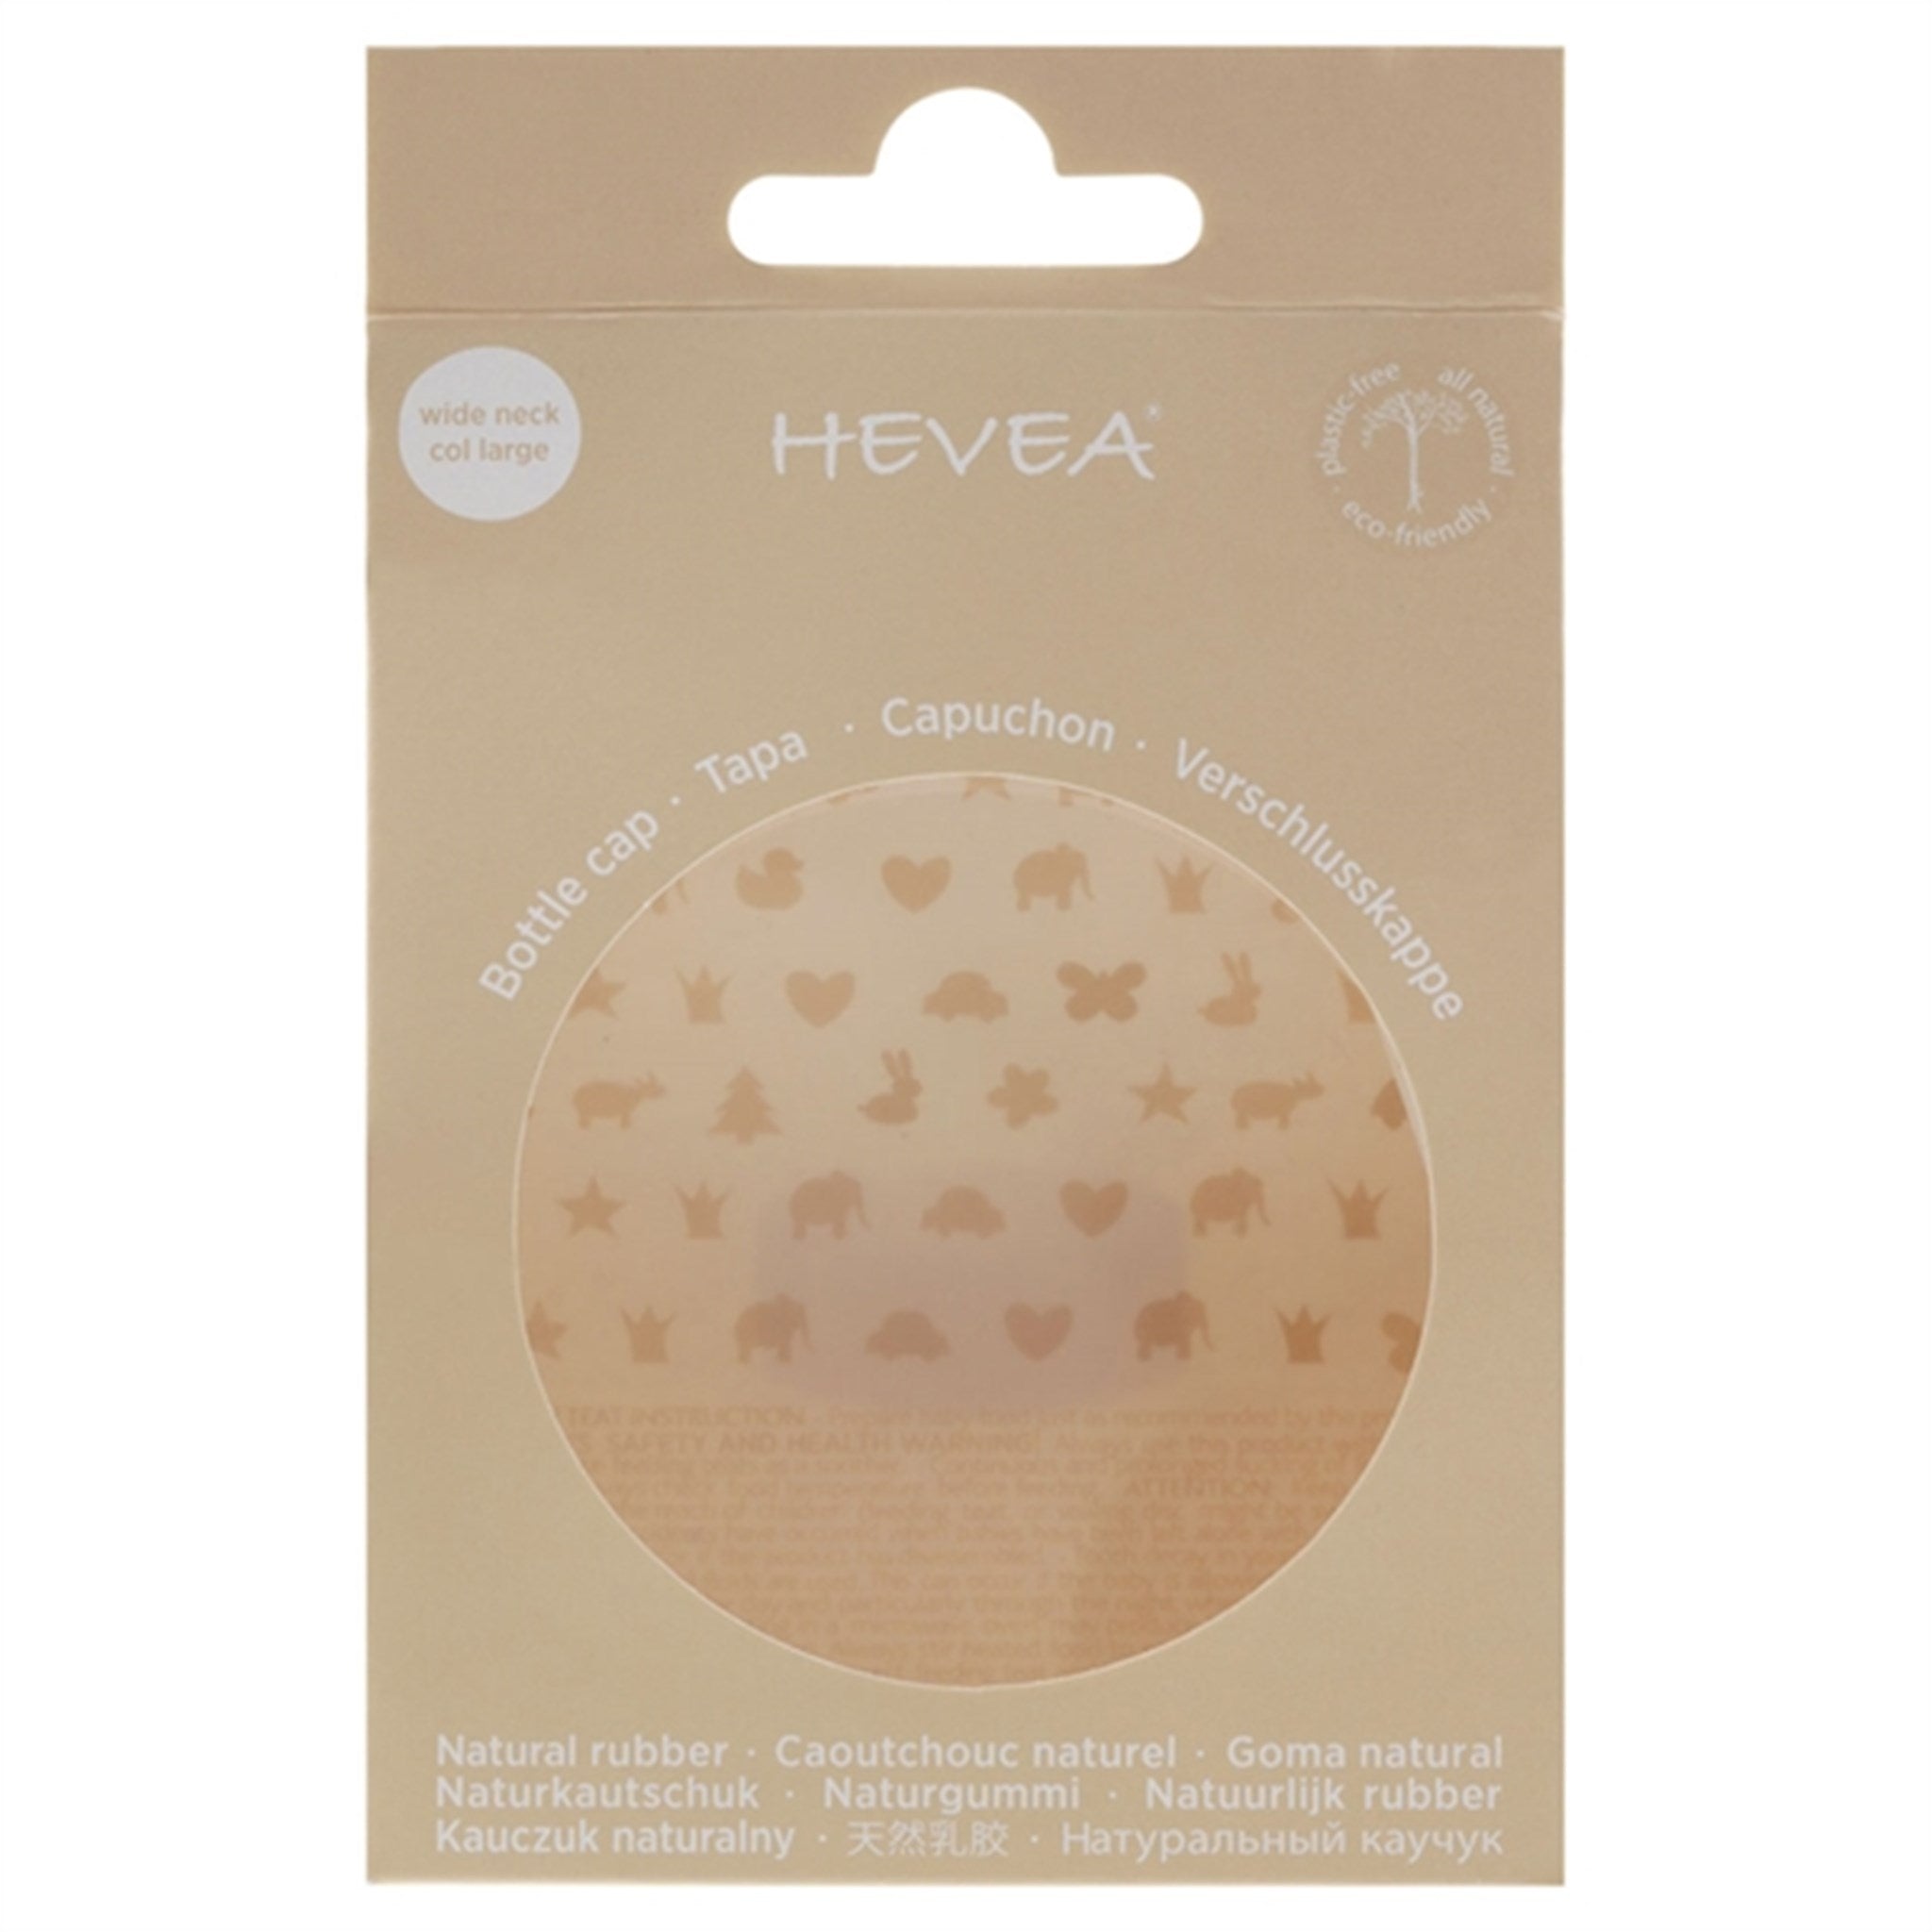 Hevea Baby Bottle Cap For Bottle With Wide Neck 3